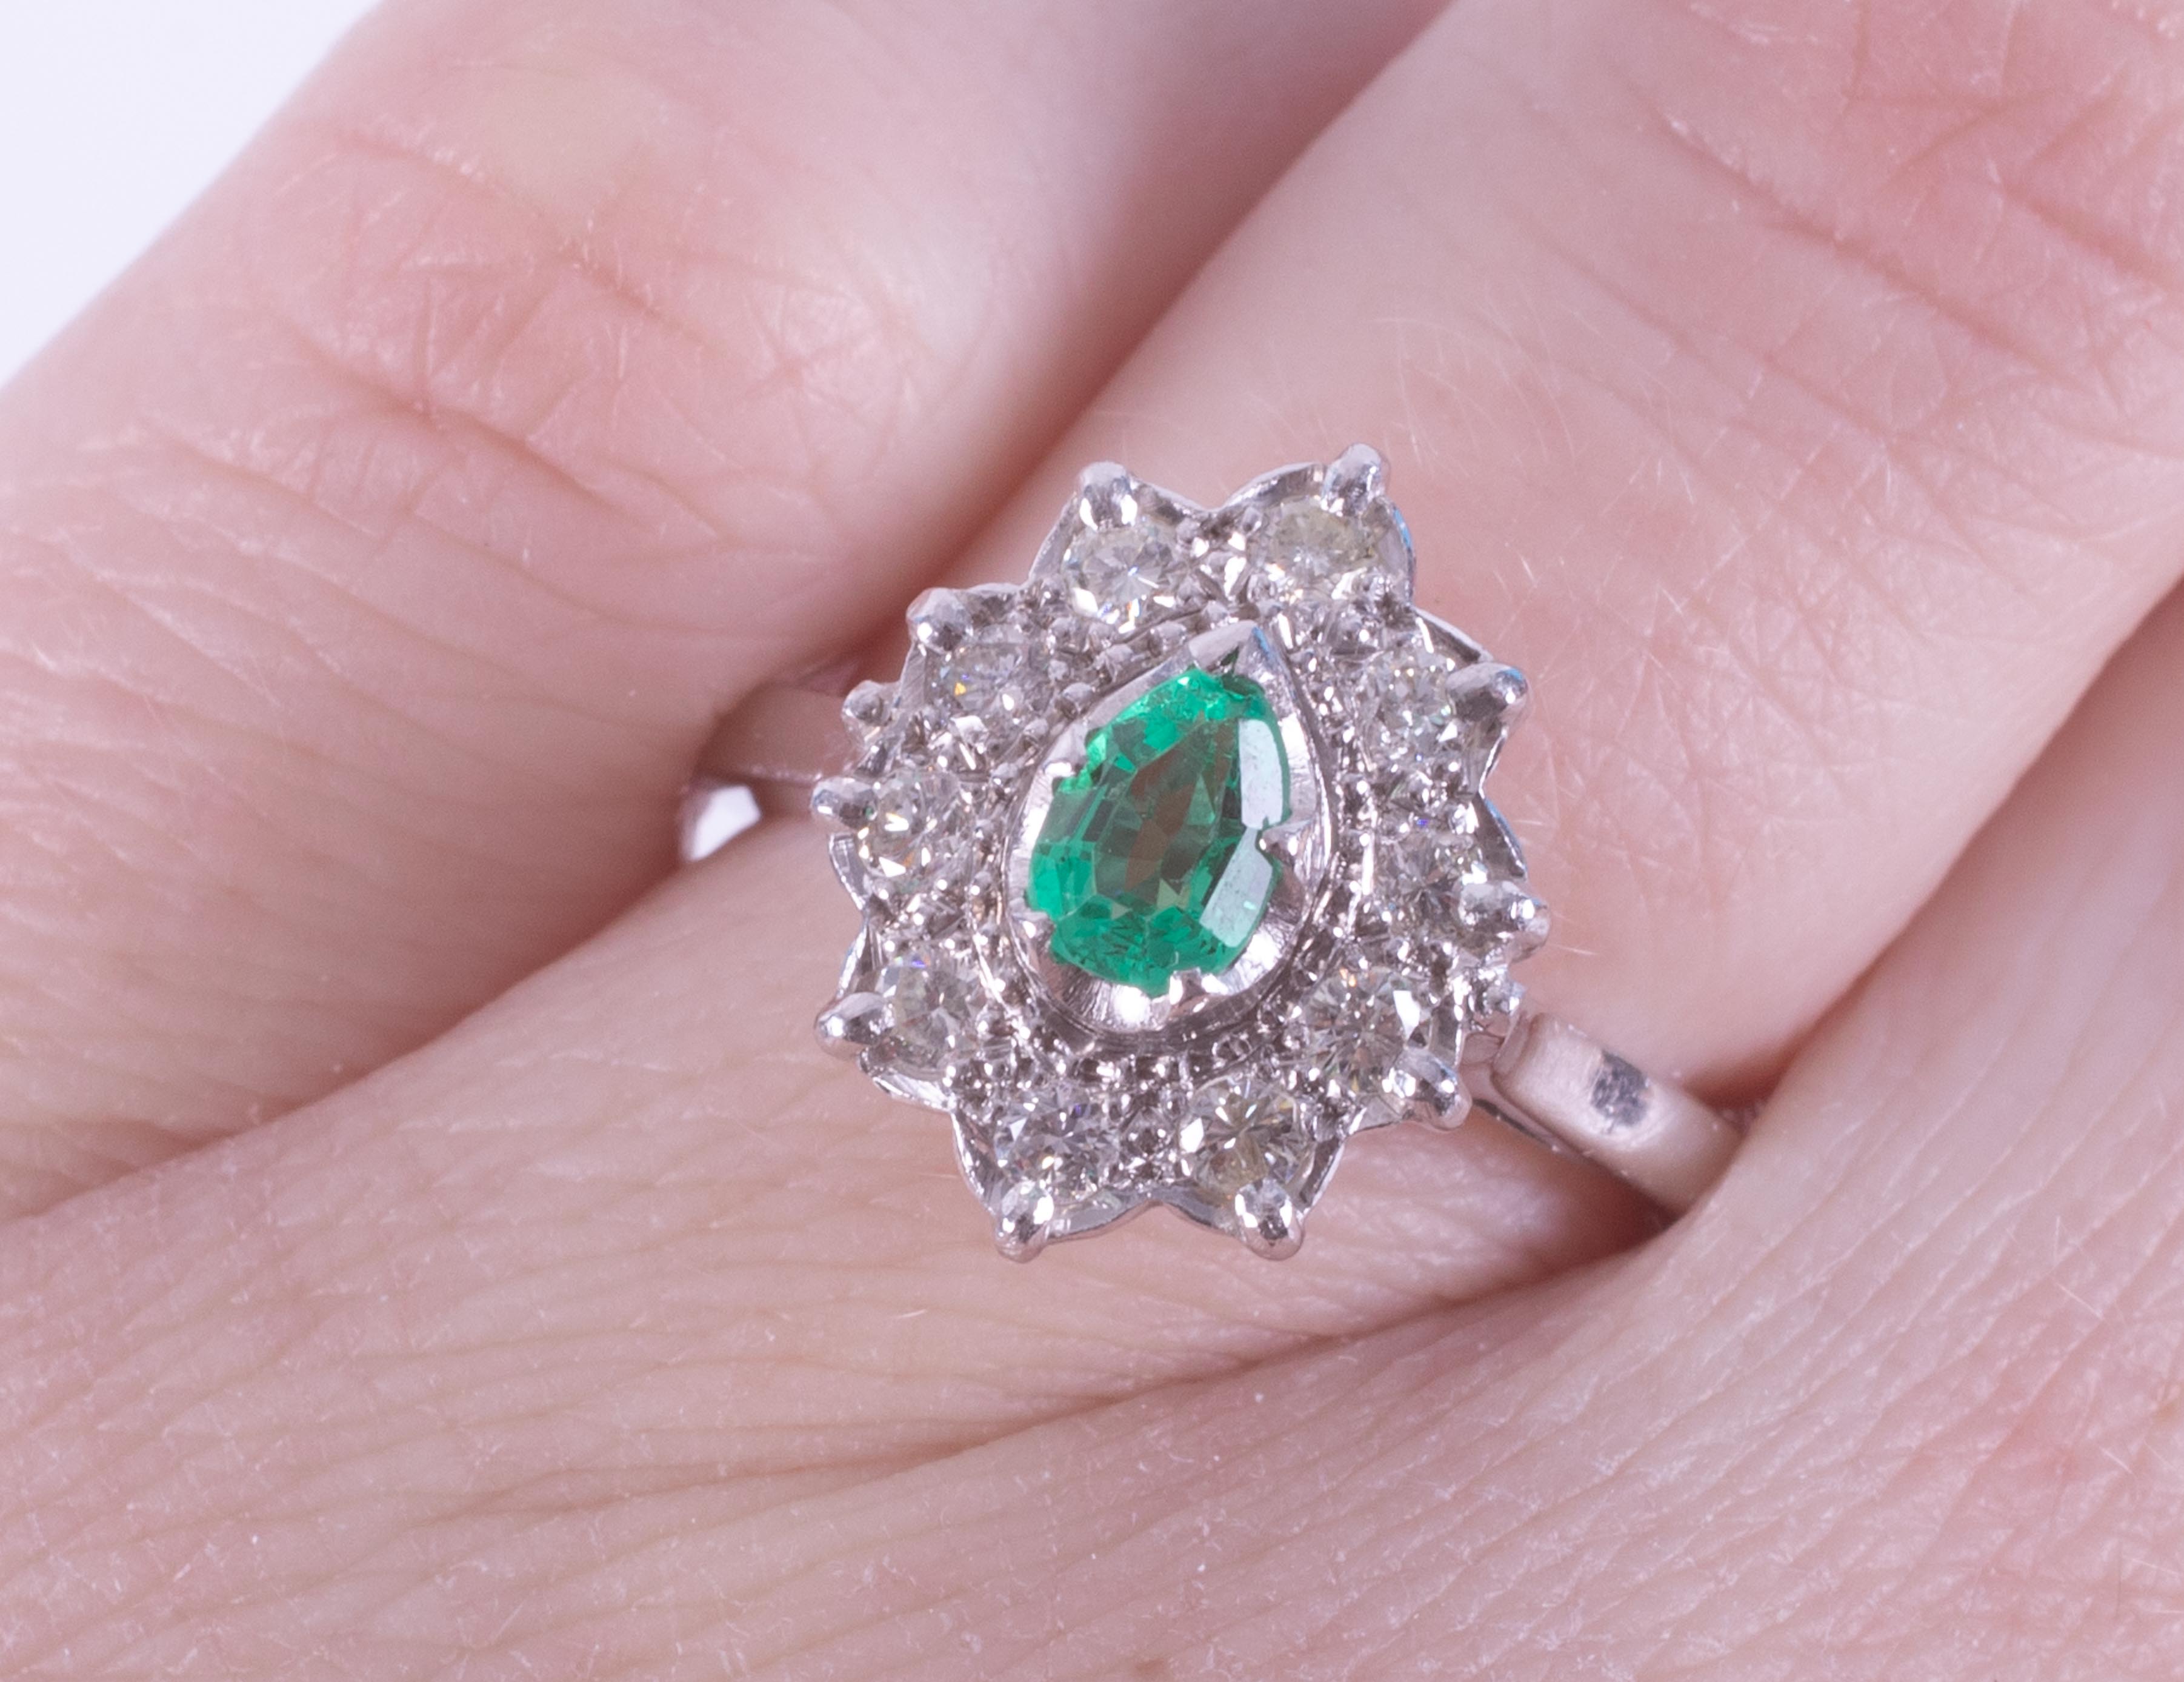 An 18ct white gold cluster style ring set with a central pear cut emerald, approx. 0.32 carats, - Image 2 of 2